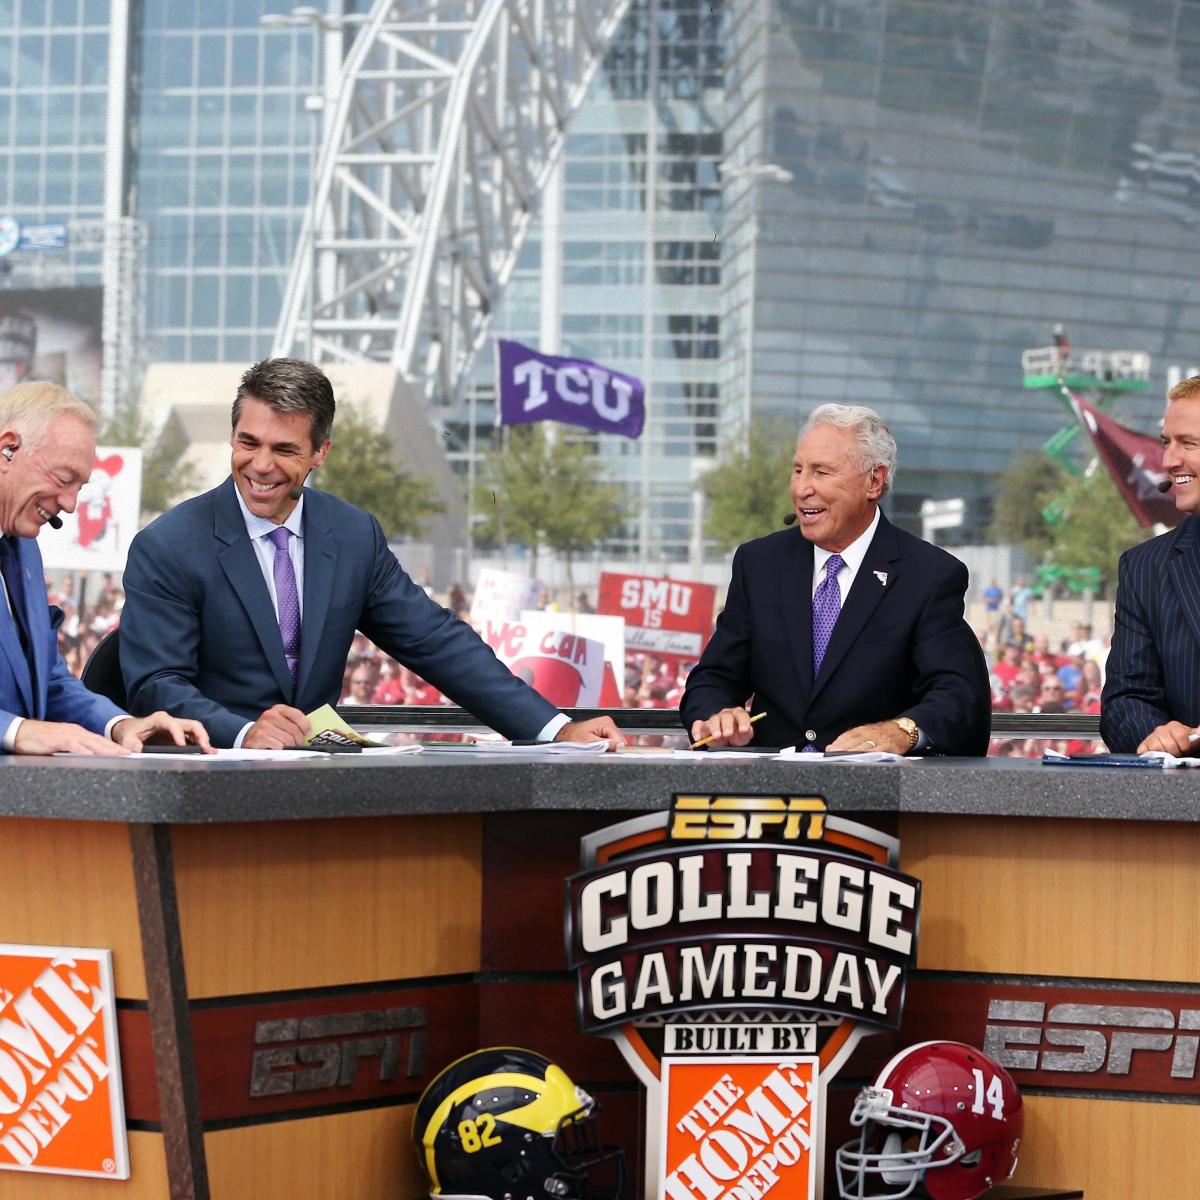 College Gameday 2013: Week 1 Schedule, Location, Predictions and More